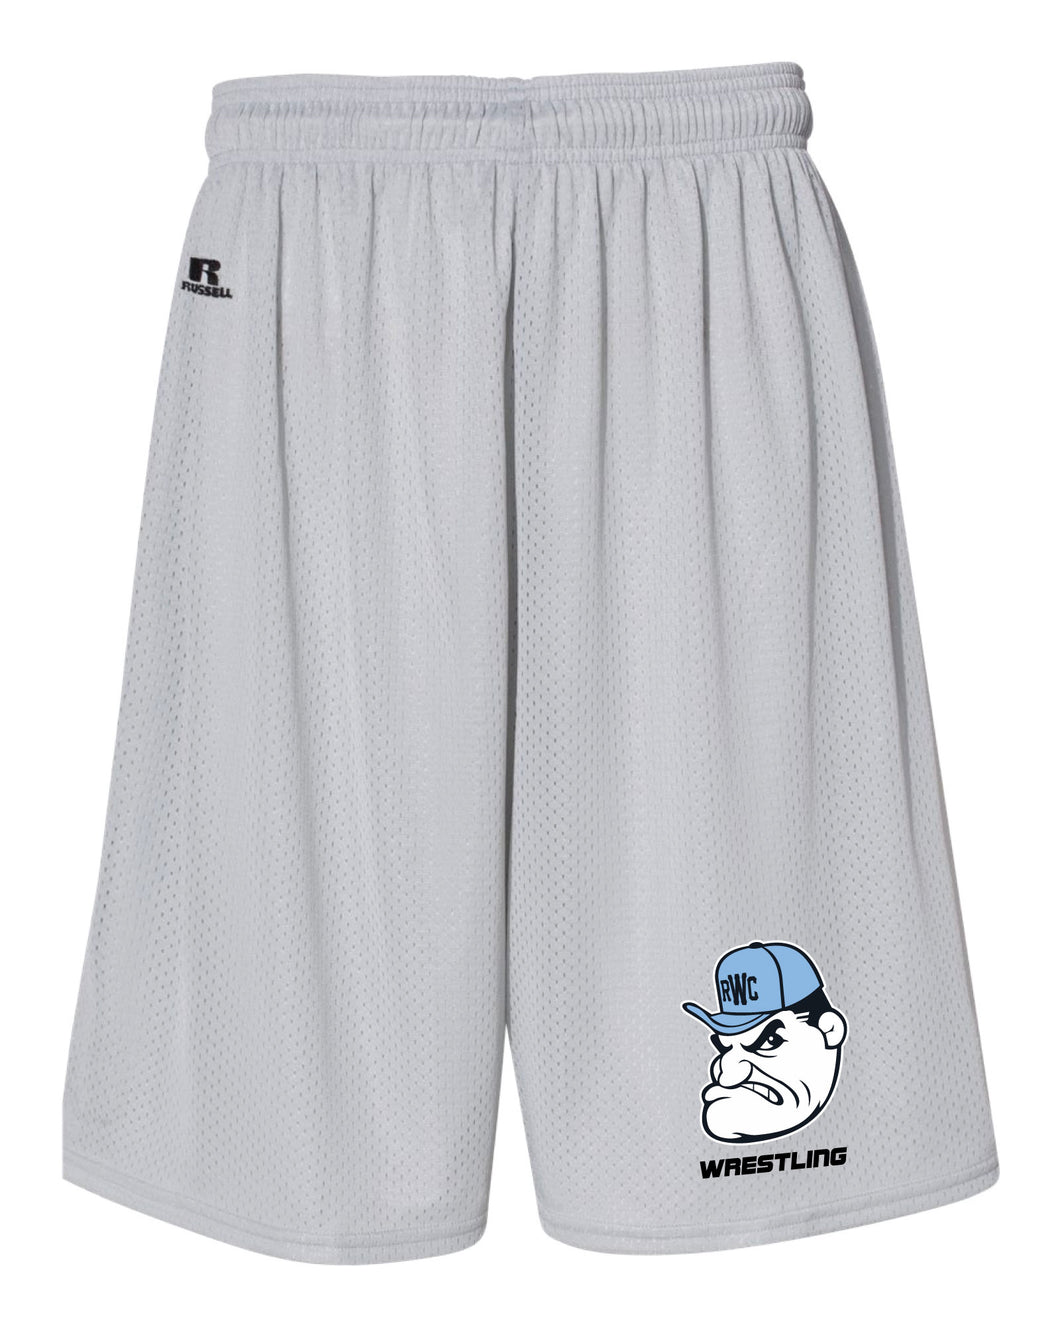 Rebel Wrestling Russell Athletic Tech Shorts - Gray